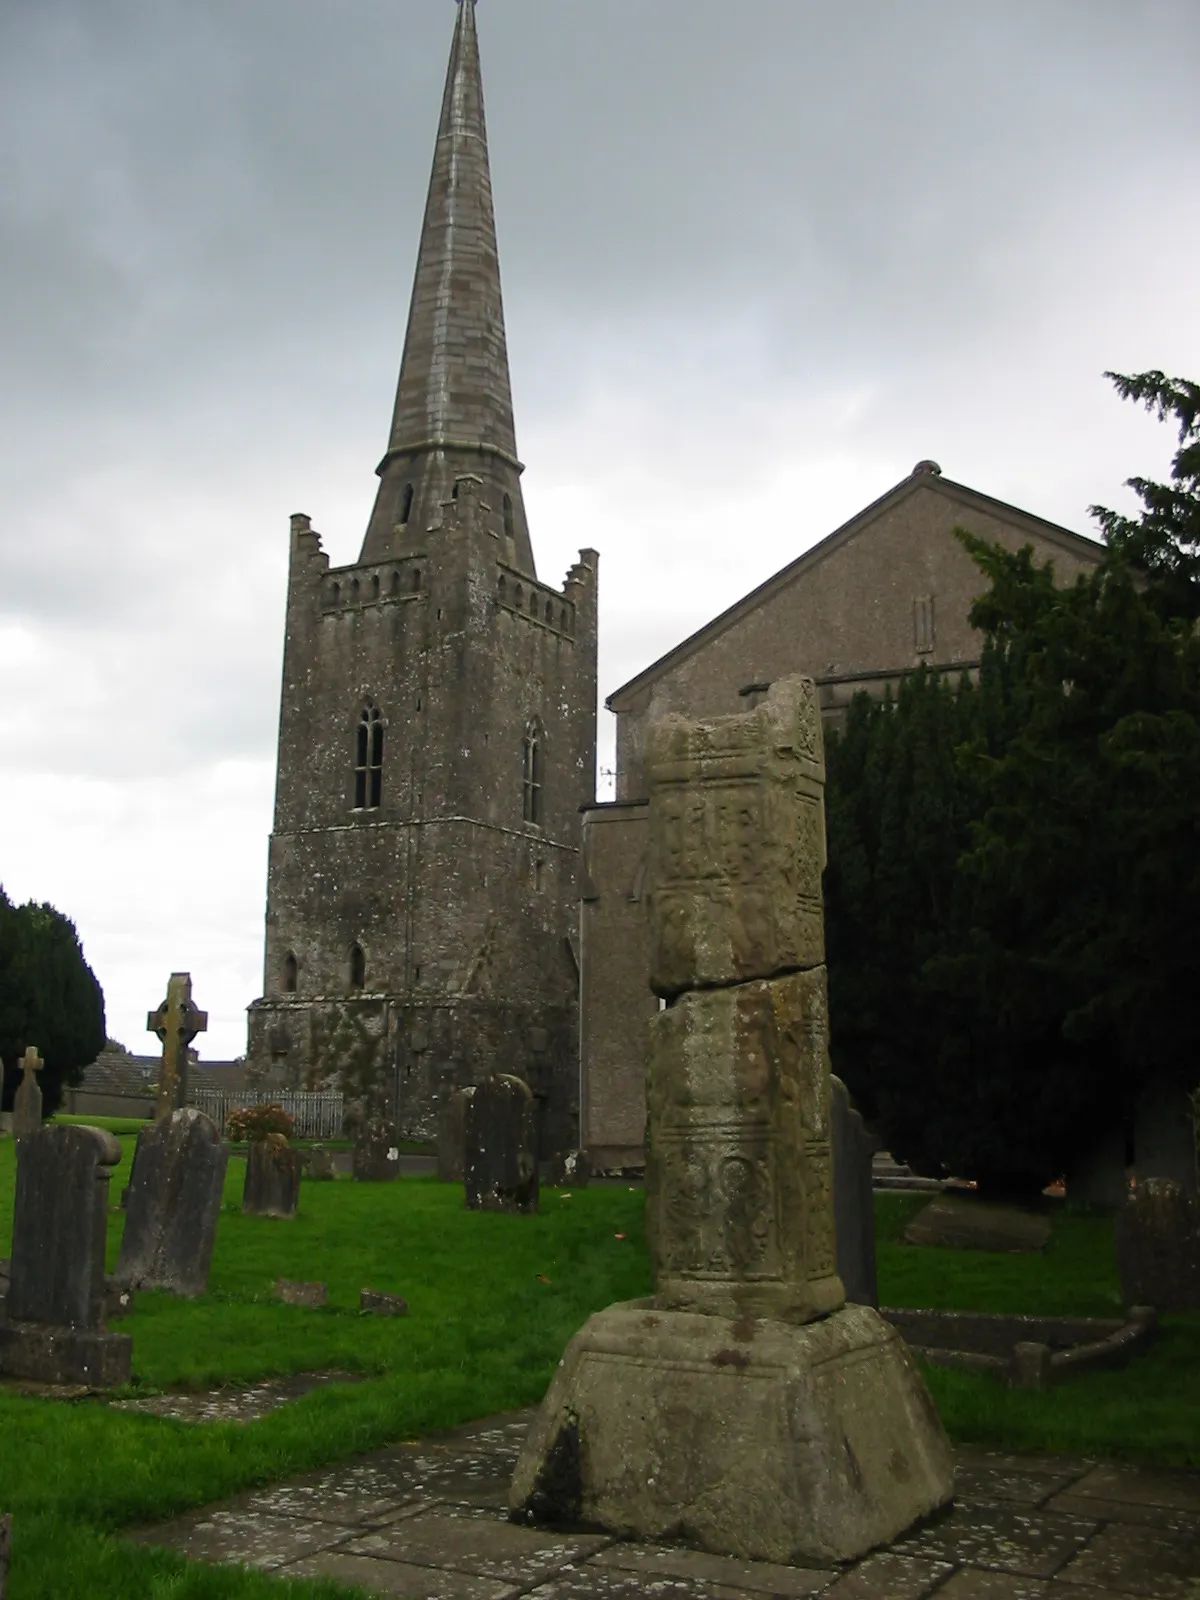 Photo showing: The Broken Cross is one of the five high crosses in Kells, County Meath, Ireland. It may have been the tallest high cross ever. It may have been broken by Oliver Cromwell's army, which used the church as stables. Here is a south-west view, with behind St Columba's Church.